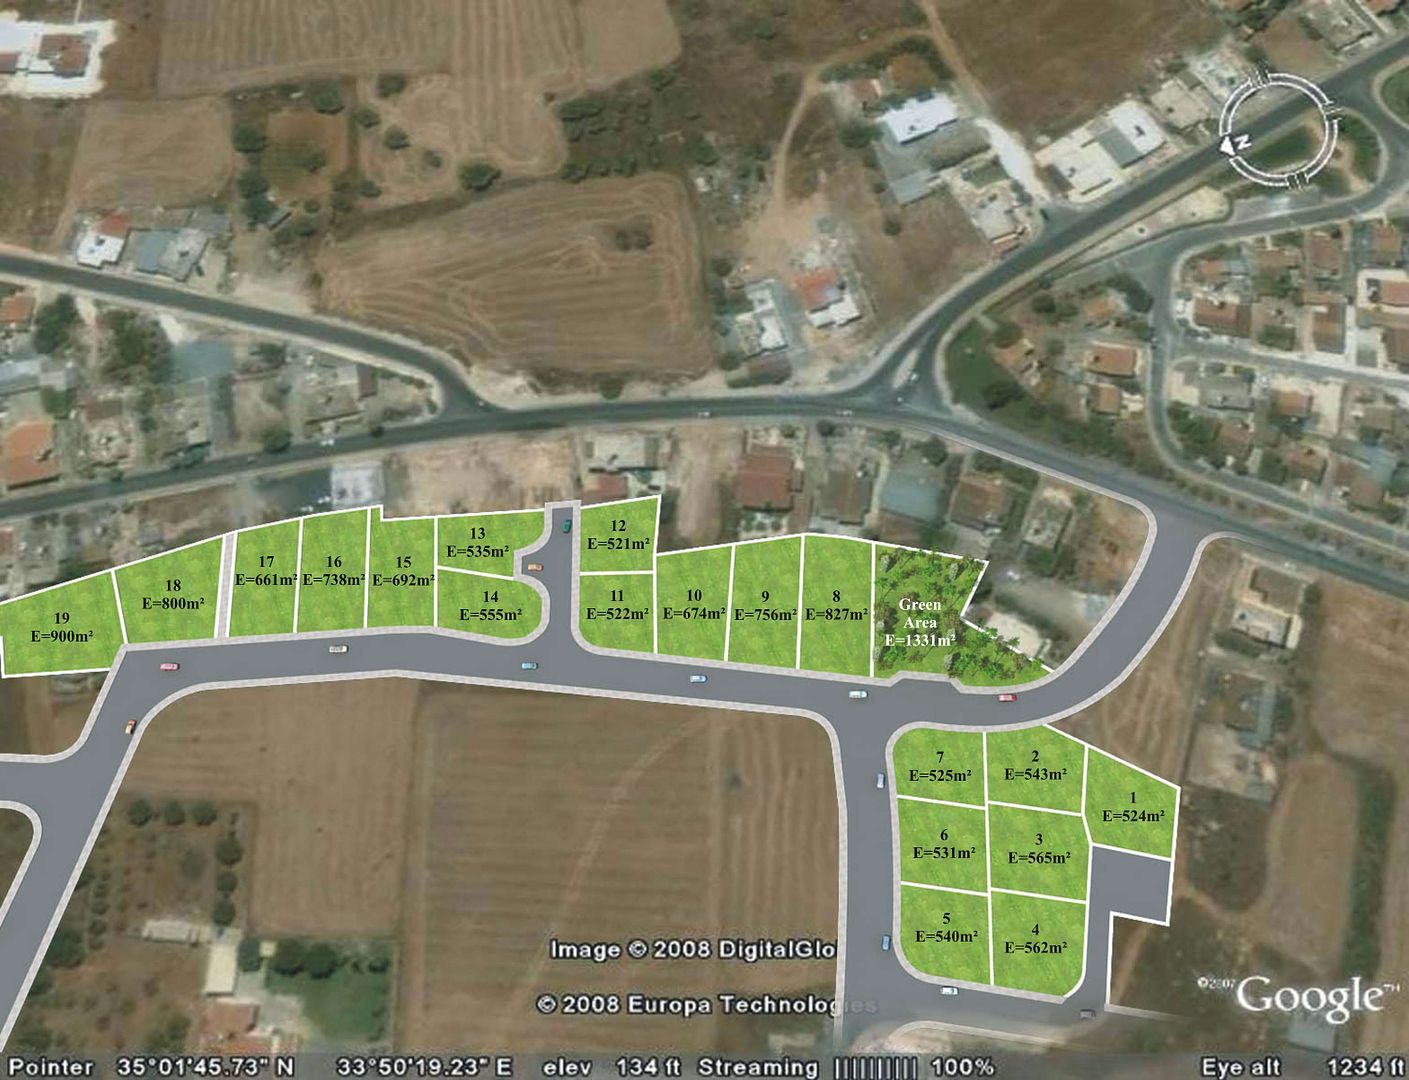 Google map and overlay showing the plots of land   